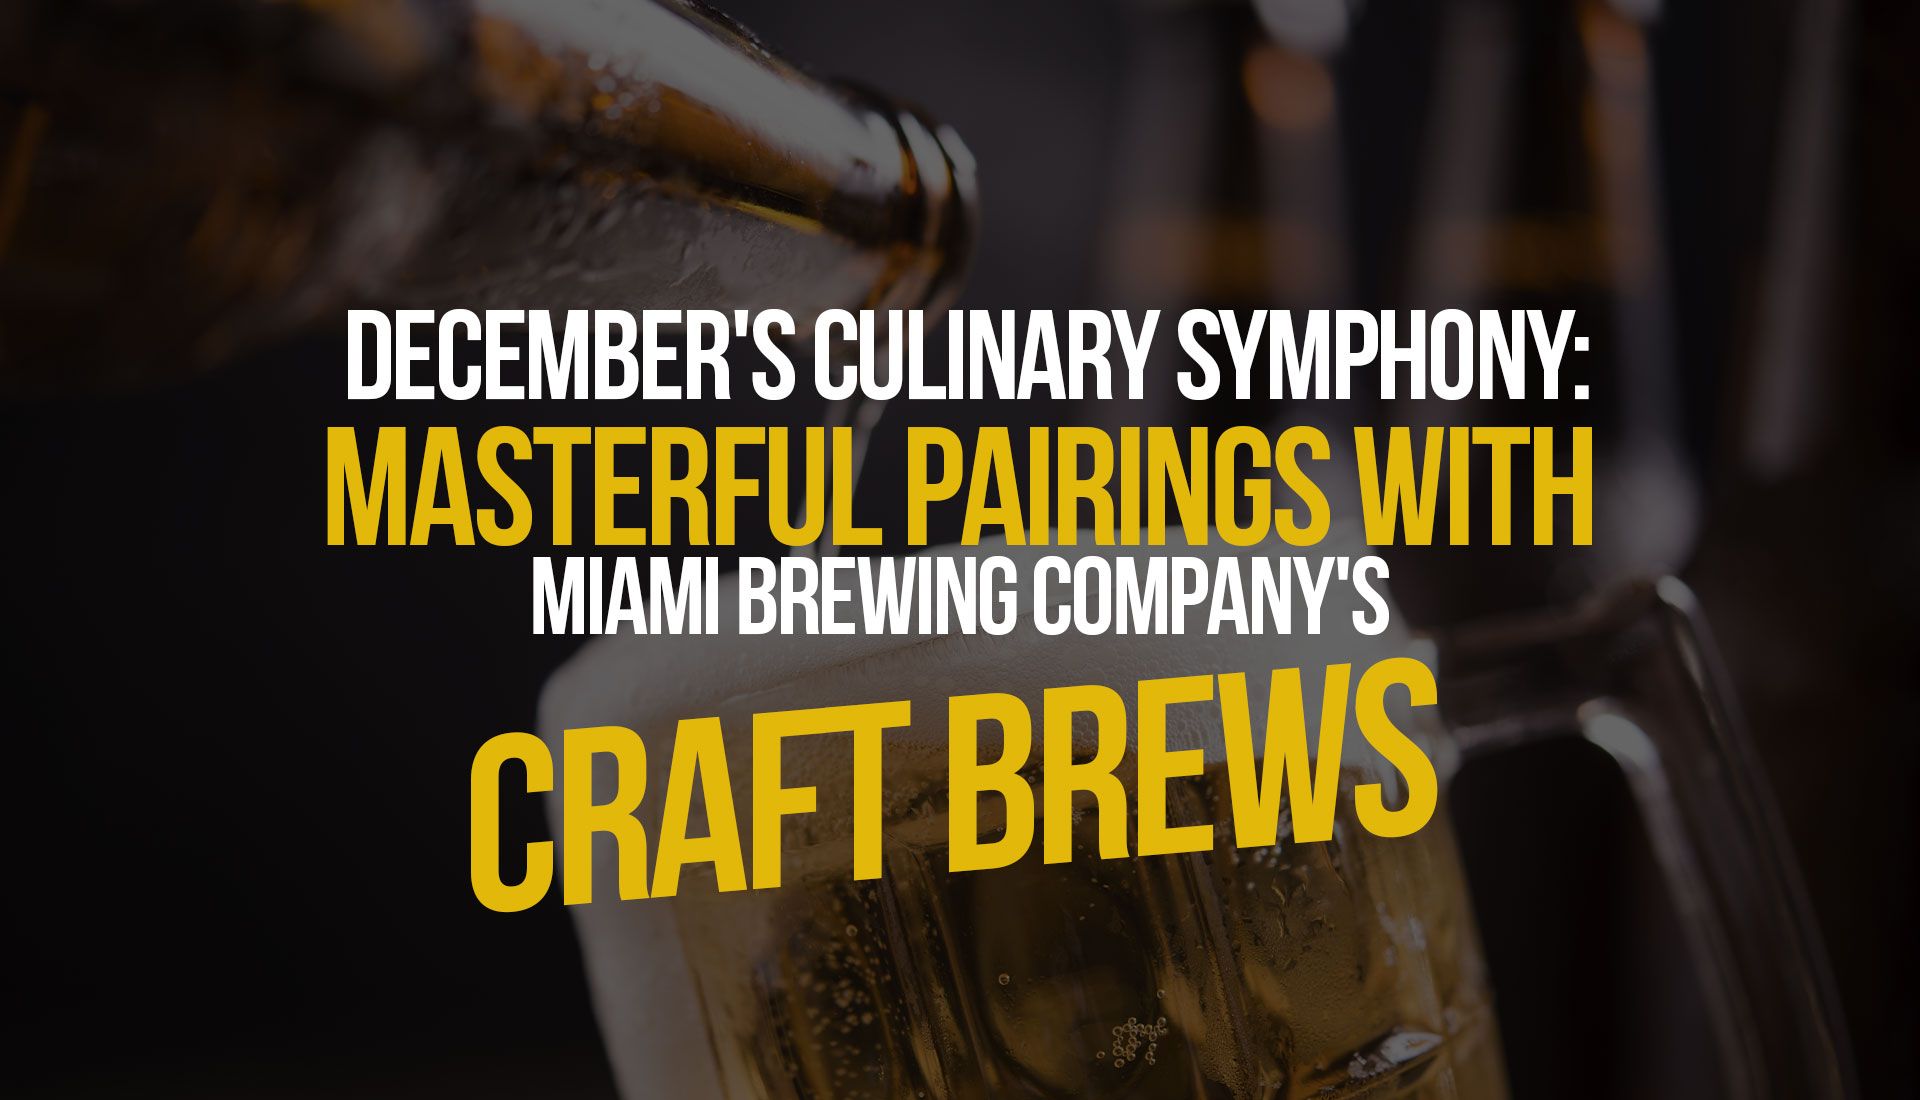 December's Culinary Symphony: Masterful Pairings with Miami Brewing Company's Craft Brews